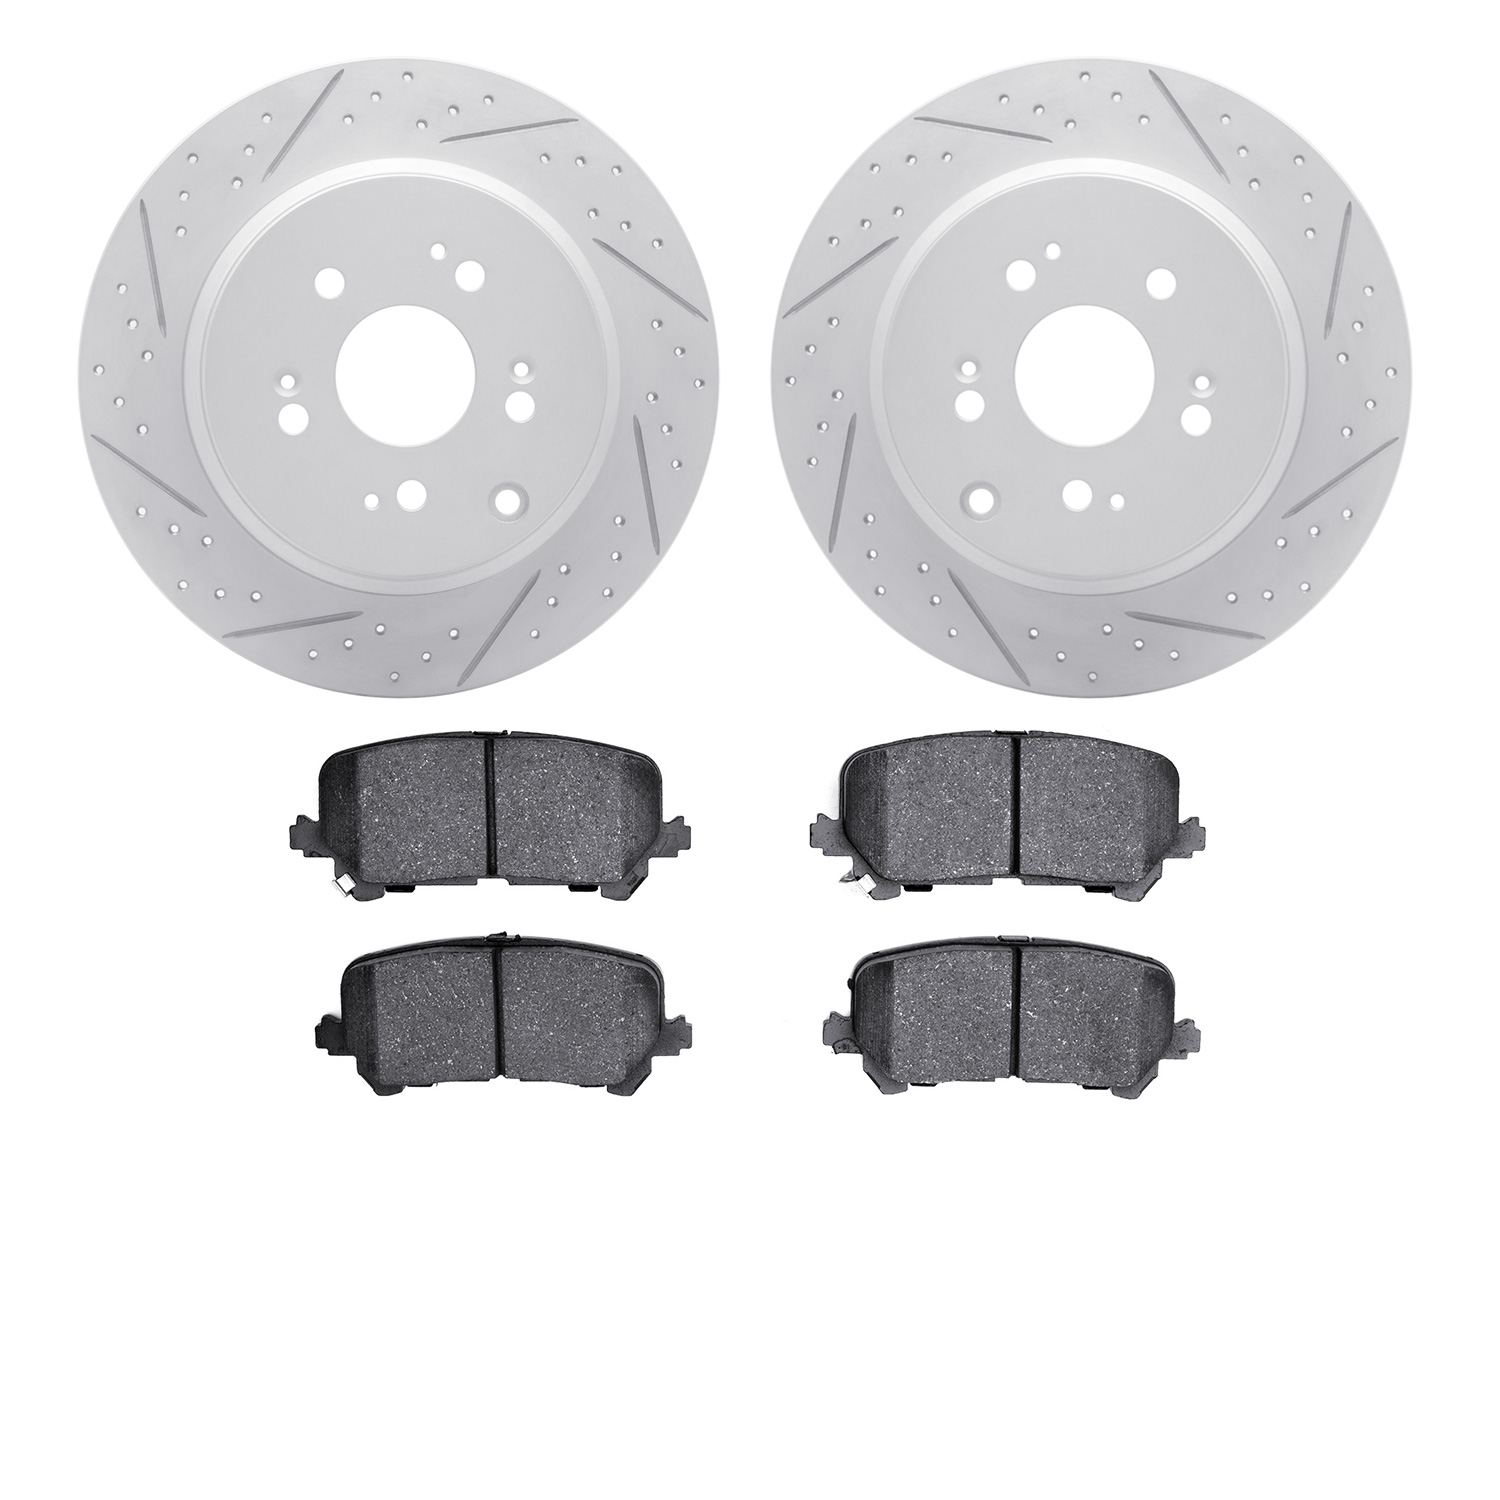 2502-59102 Geoperformance Drilled/Slotted Rotors w/5000 Advanced Brake Pads Kit, 2007-2017 Acura/Honda, Position: Rear